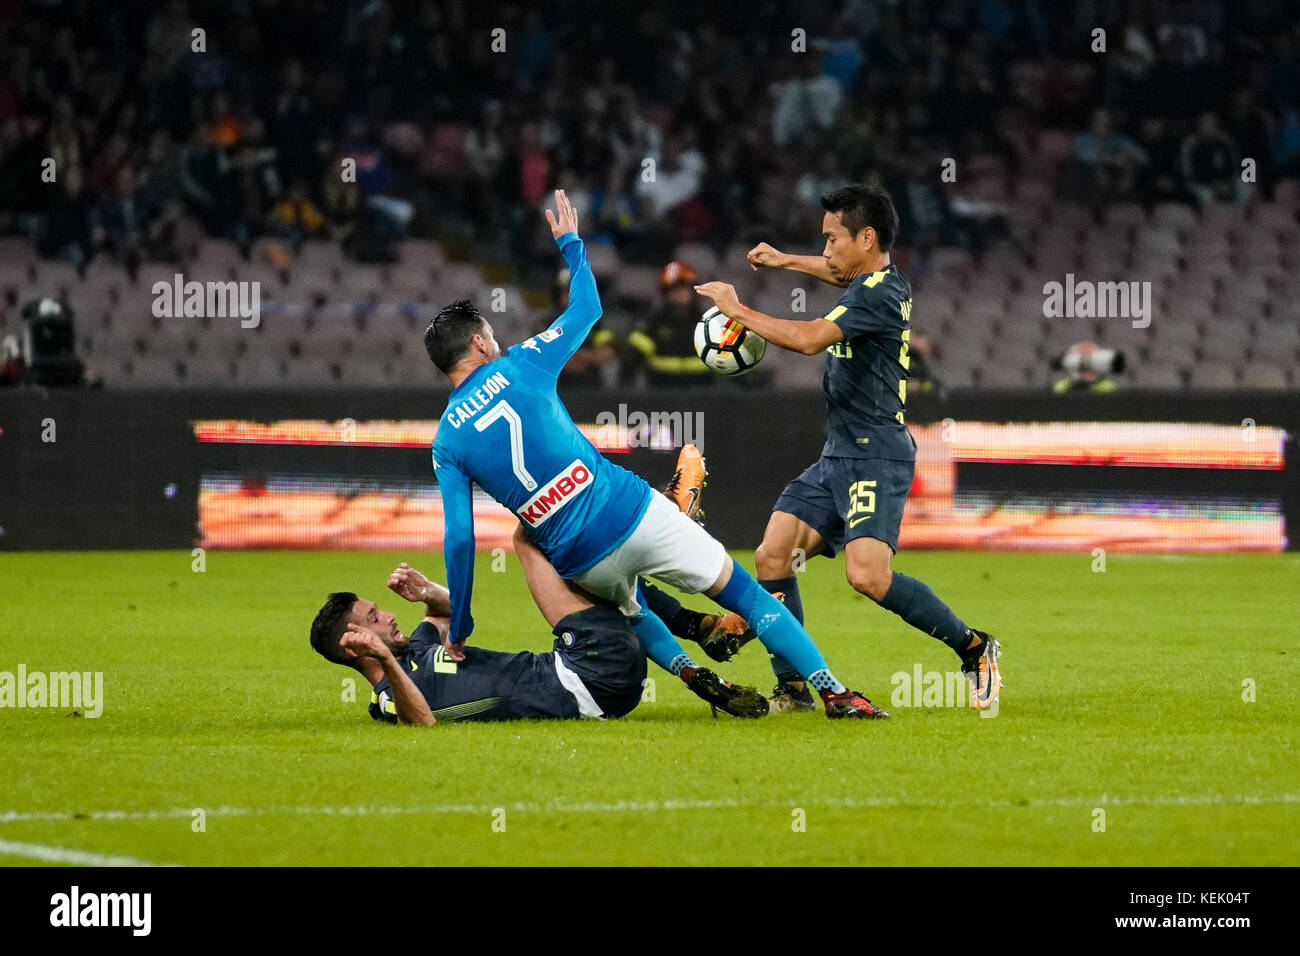 Napoli, Italy. 21st Oct, 2017. Naples - Italy 21/10/2017 JOSE MARIA CALLEJON of S.S.C. NAPOLI and YUTO NAGATOMO of Inter fights for the ball during Serie A match between S.S.C. NAPOLI and Inter at Stadio San Paolo of Naples. Credit: Emanuele Sessa/Pacific Press/Alamy Live News Stock Photo